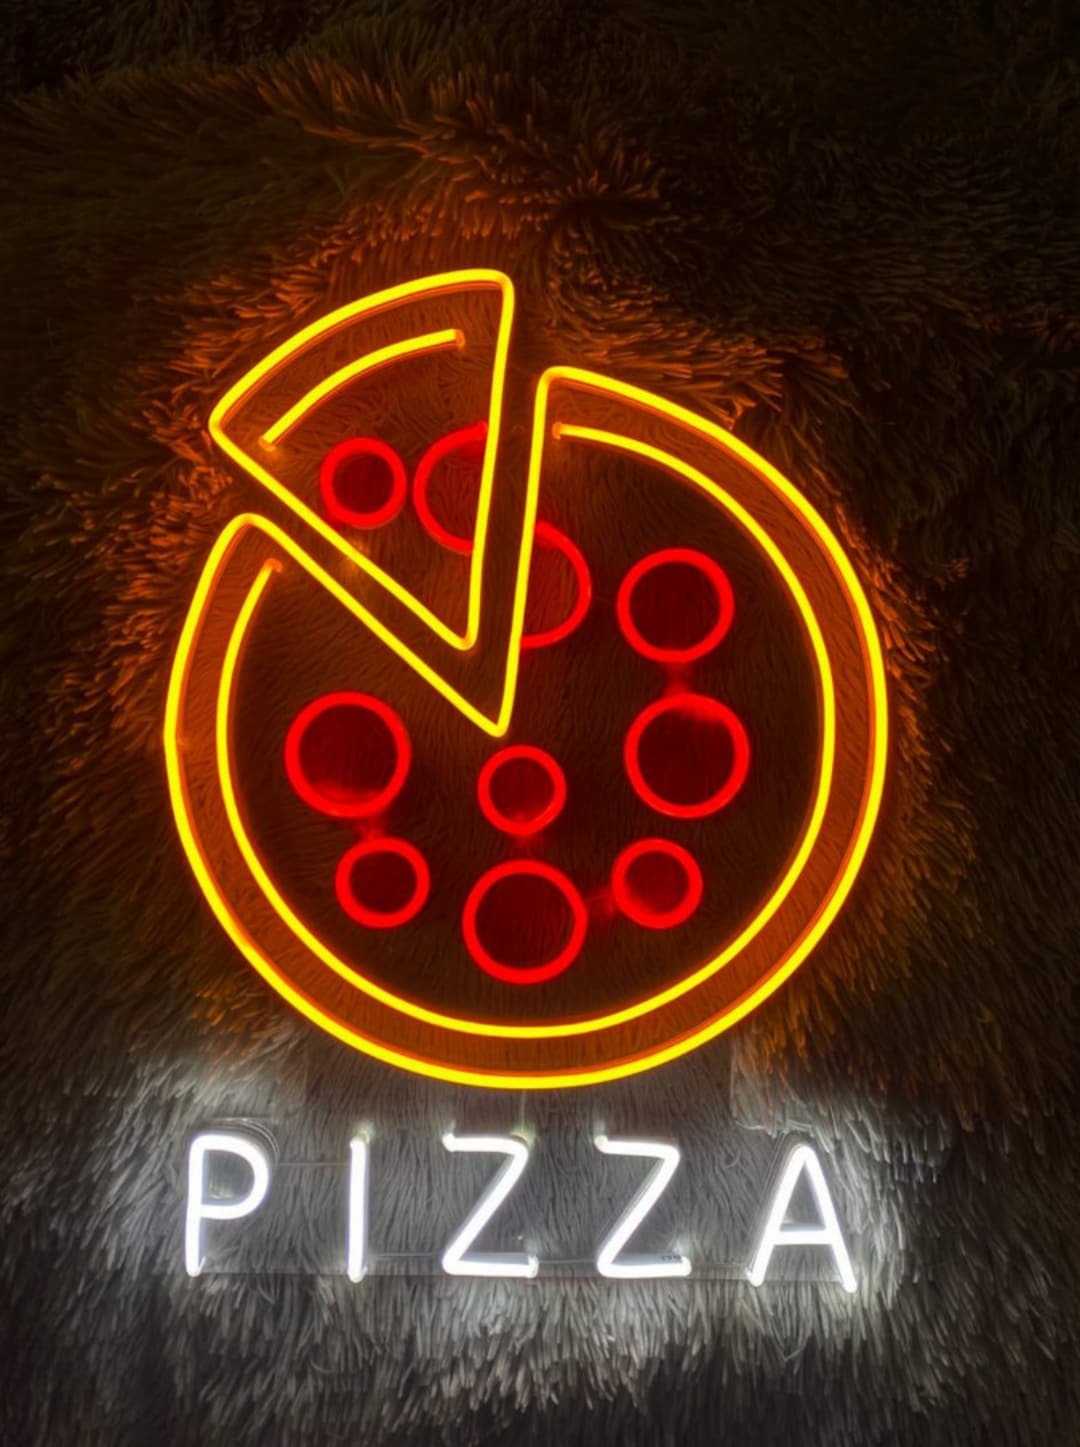  Pizza neon sign for captivating experience